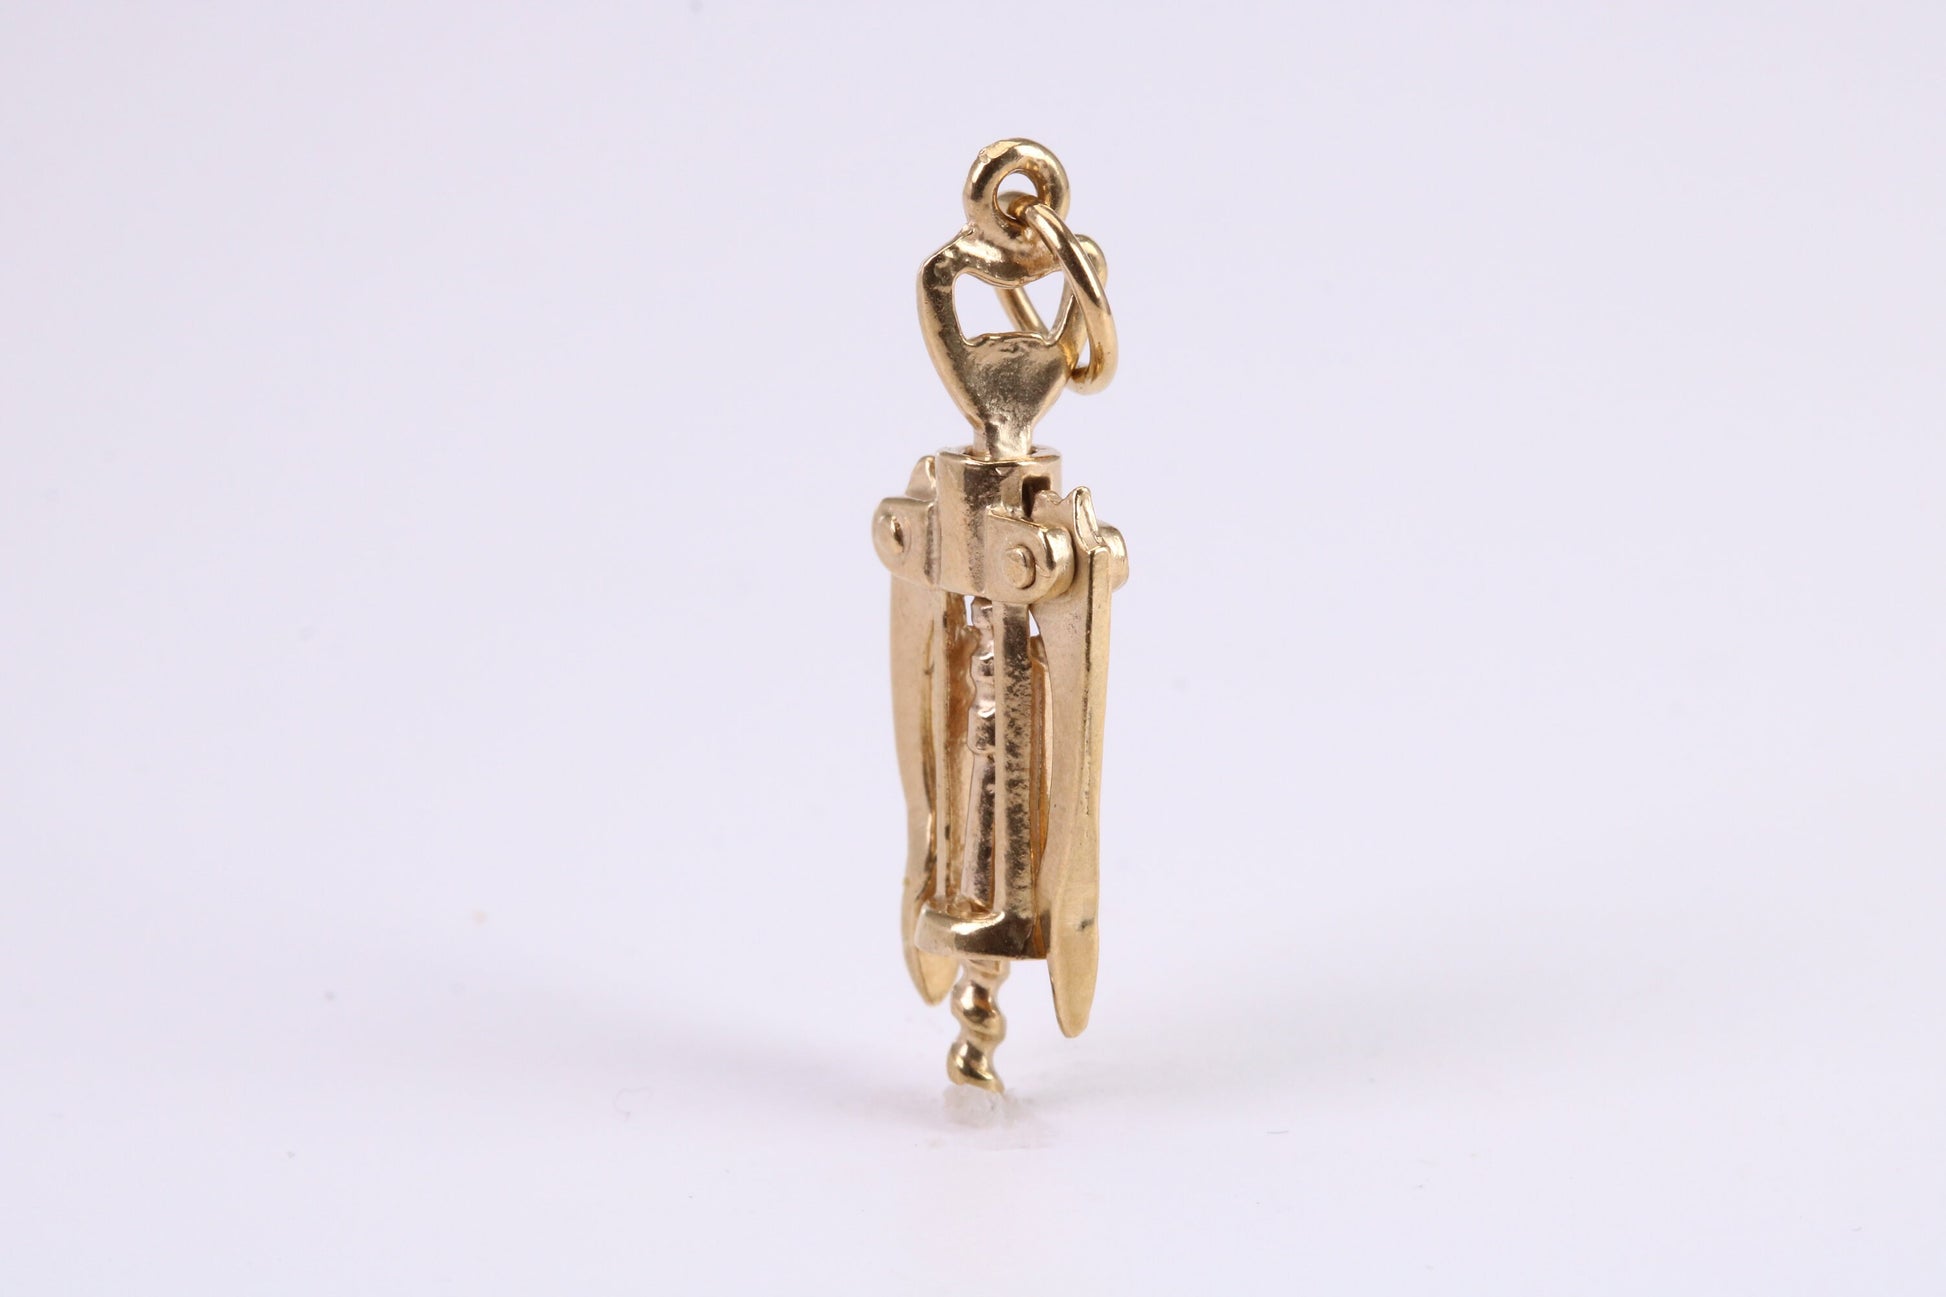 Wine Bottle Opener Charm, Traditional Charm, Made from Solid Yellow Gold, British Hallmarked, Complete with Attachment Link